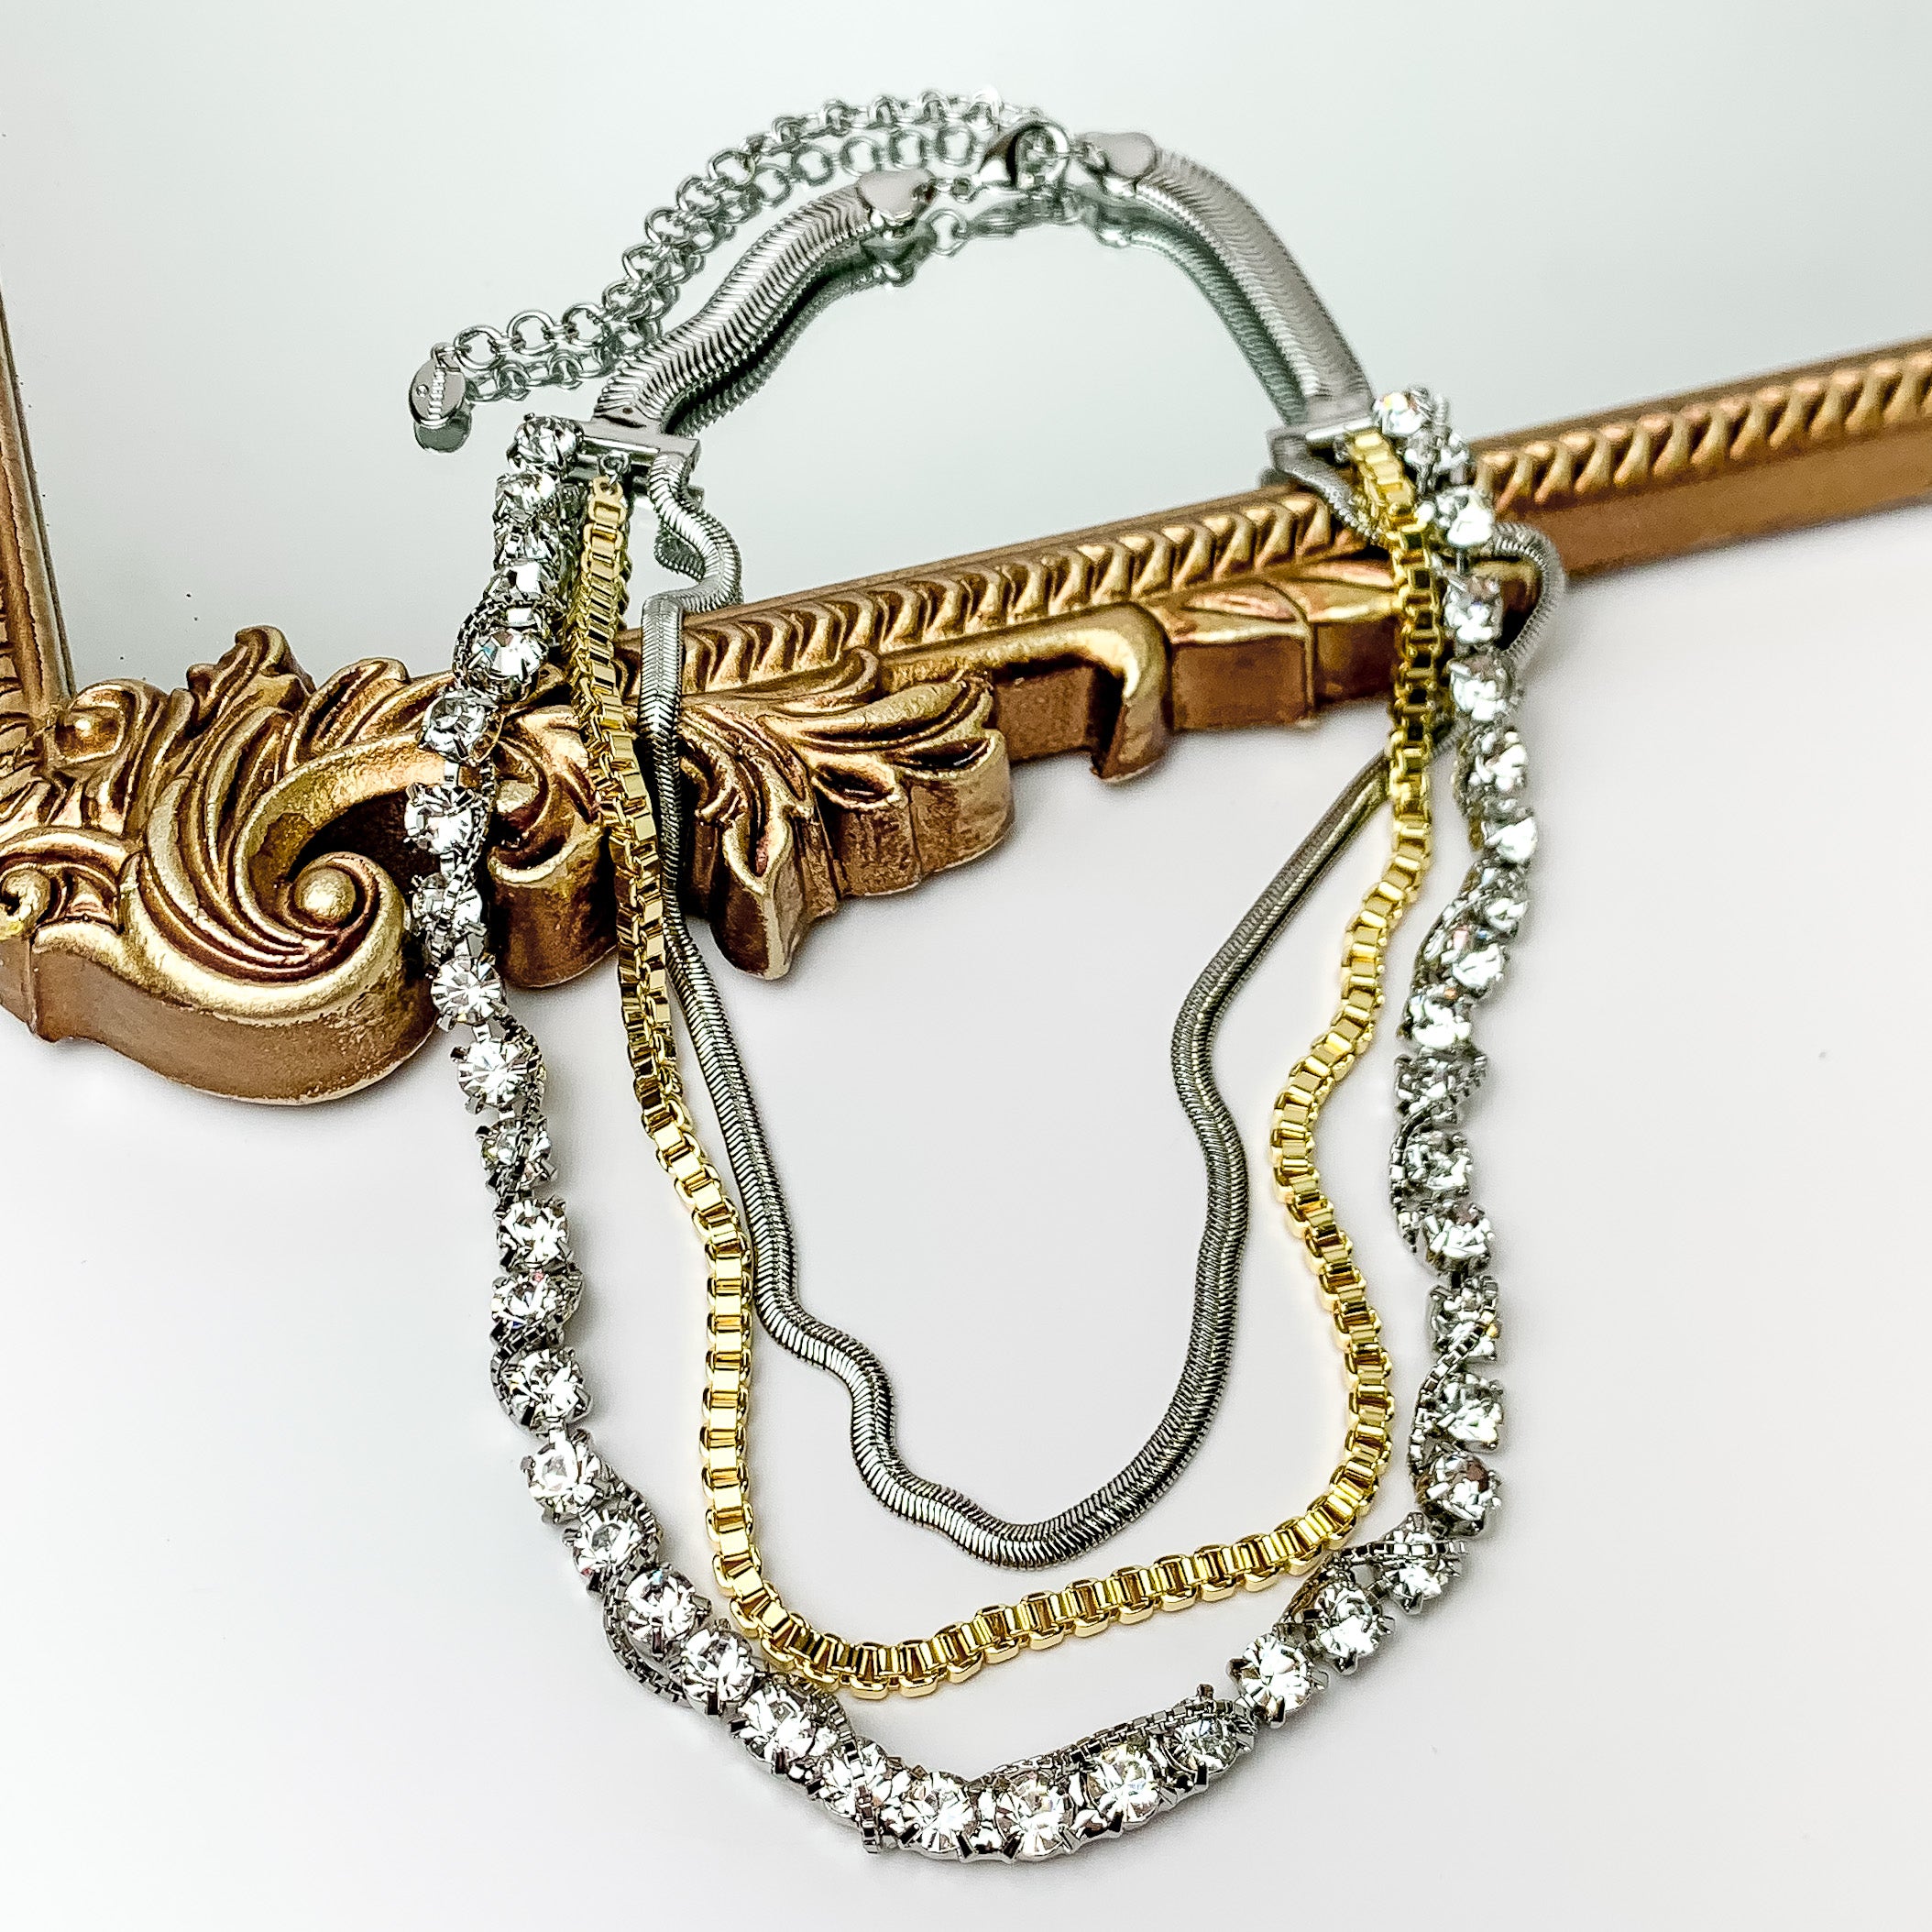 Pictured is a three strnad necklace. This necklace includes a clear crystal strand with a silver chain wrapped around the crystals, a gold box chain strand, and a silver herringbone chain strand. This necklace is pictured partially on a gold mirror on a white background. 